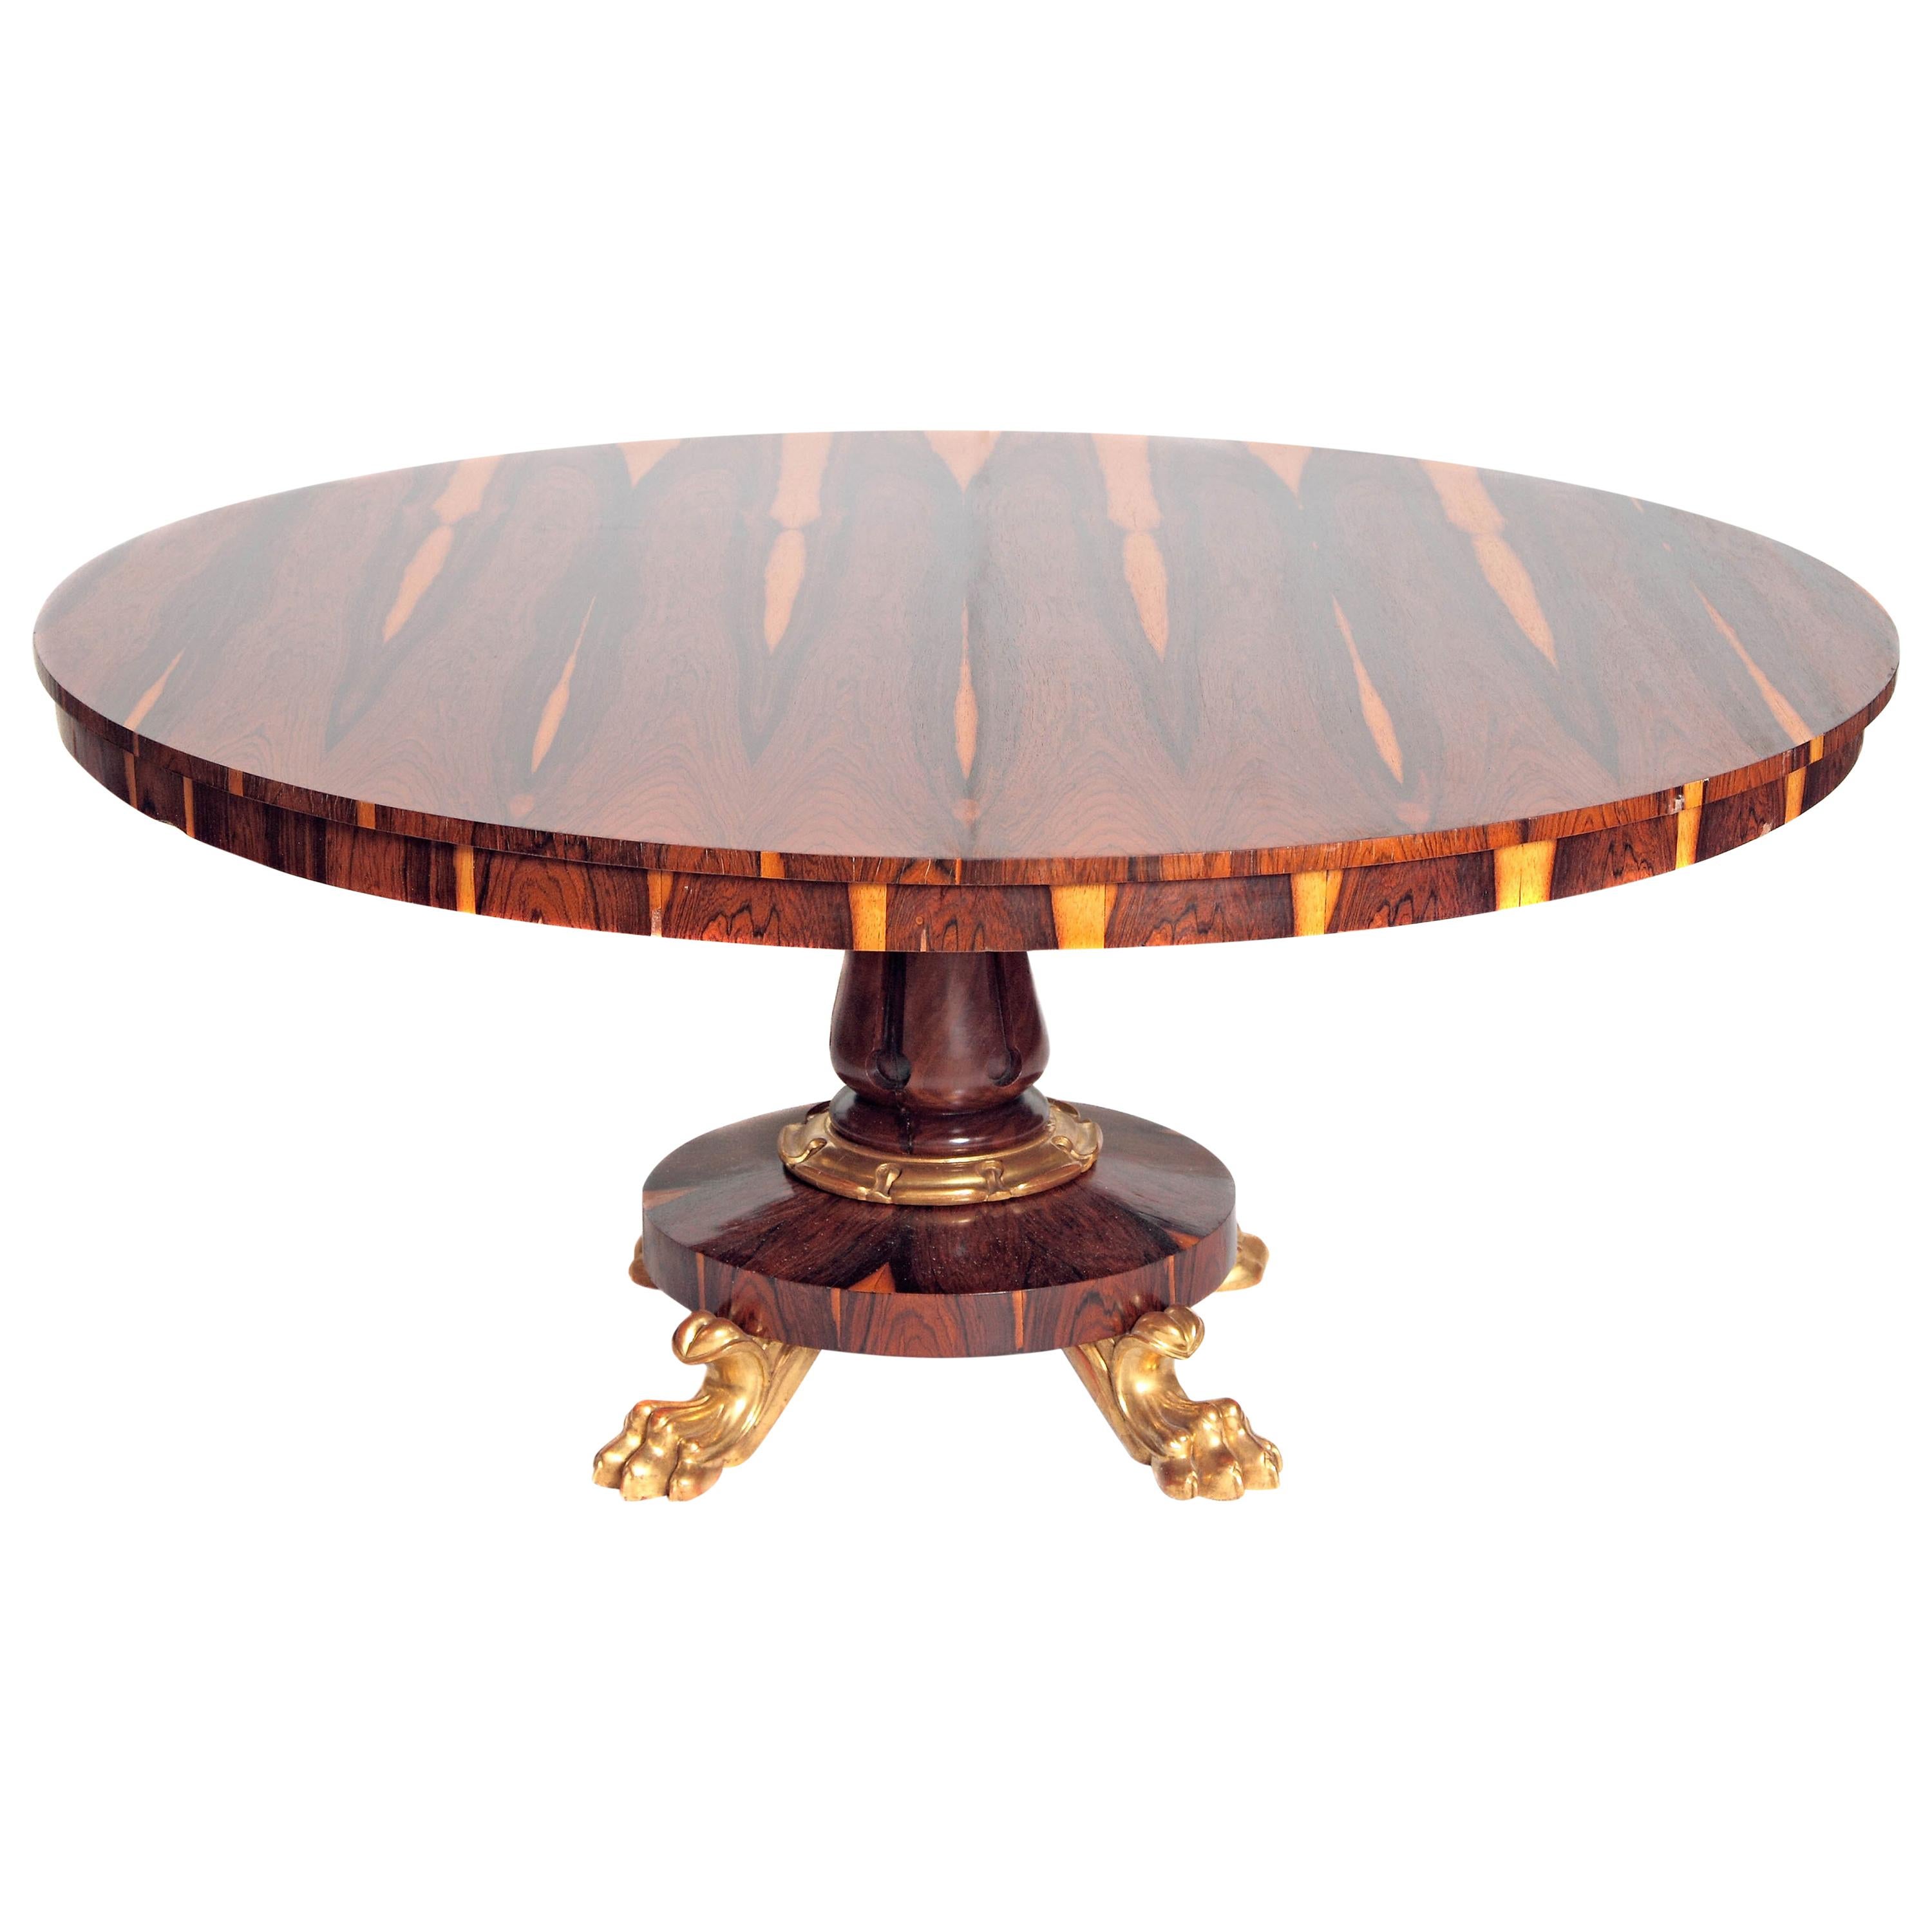 Period English Regency Centre Table of Exotic Calamander